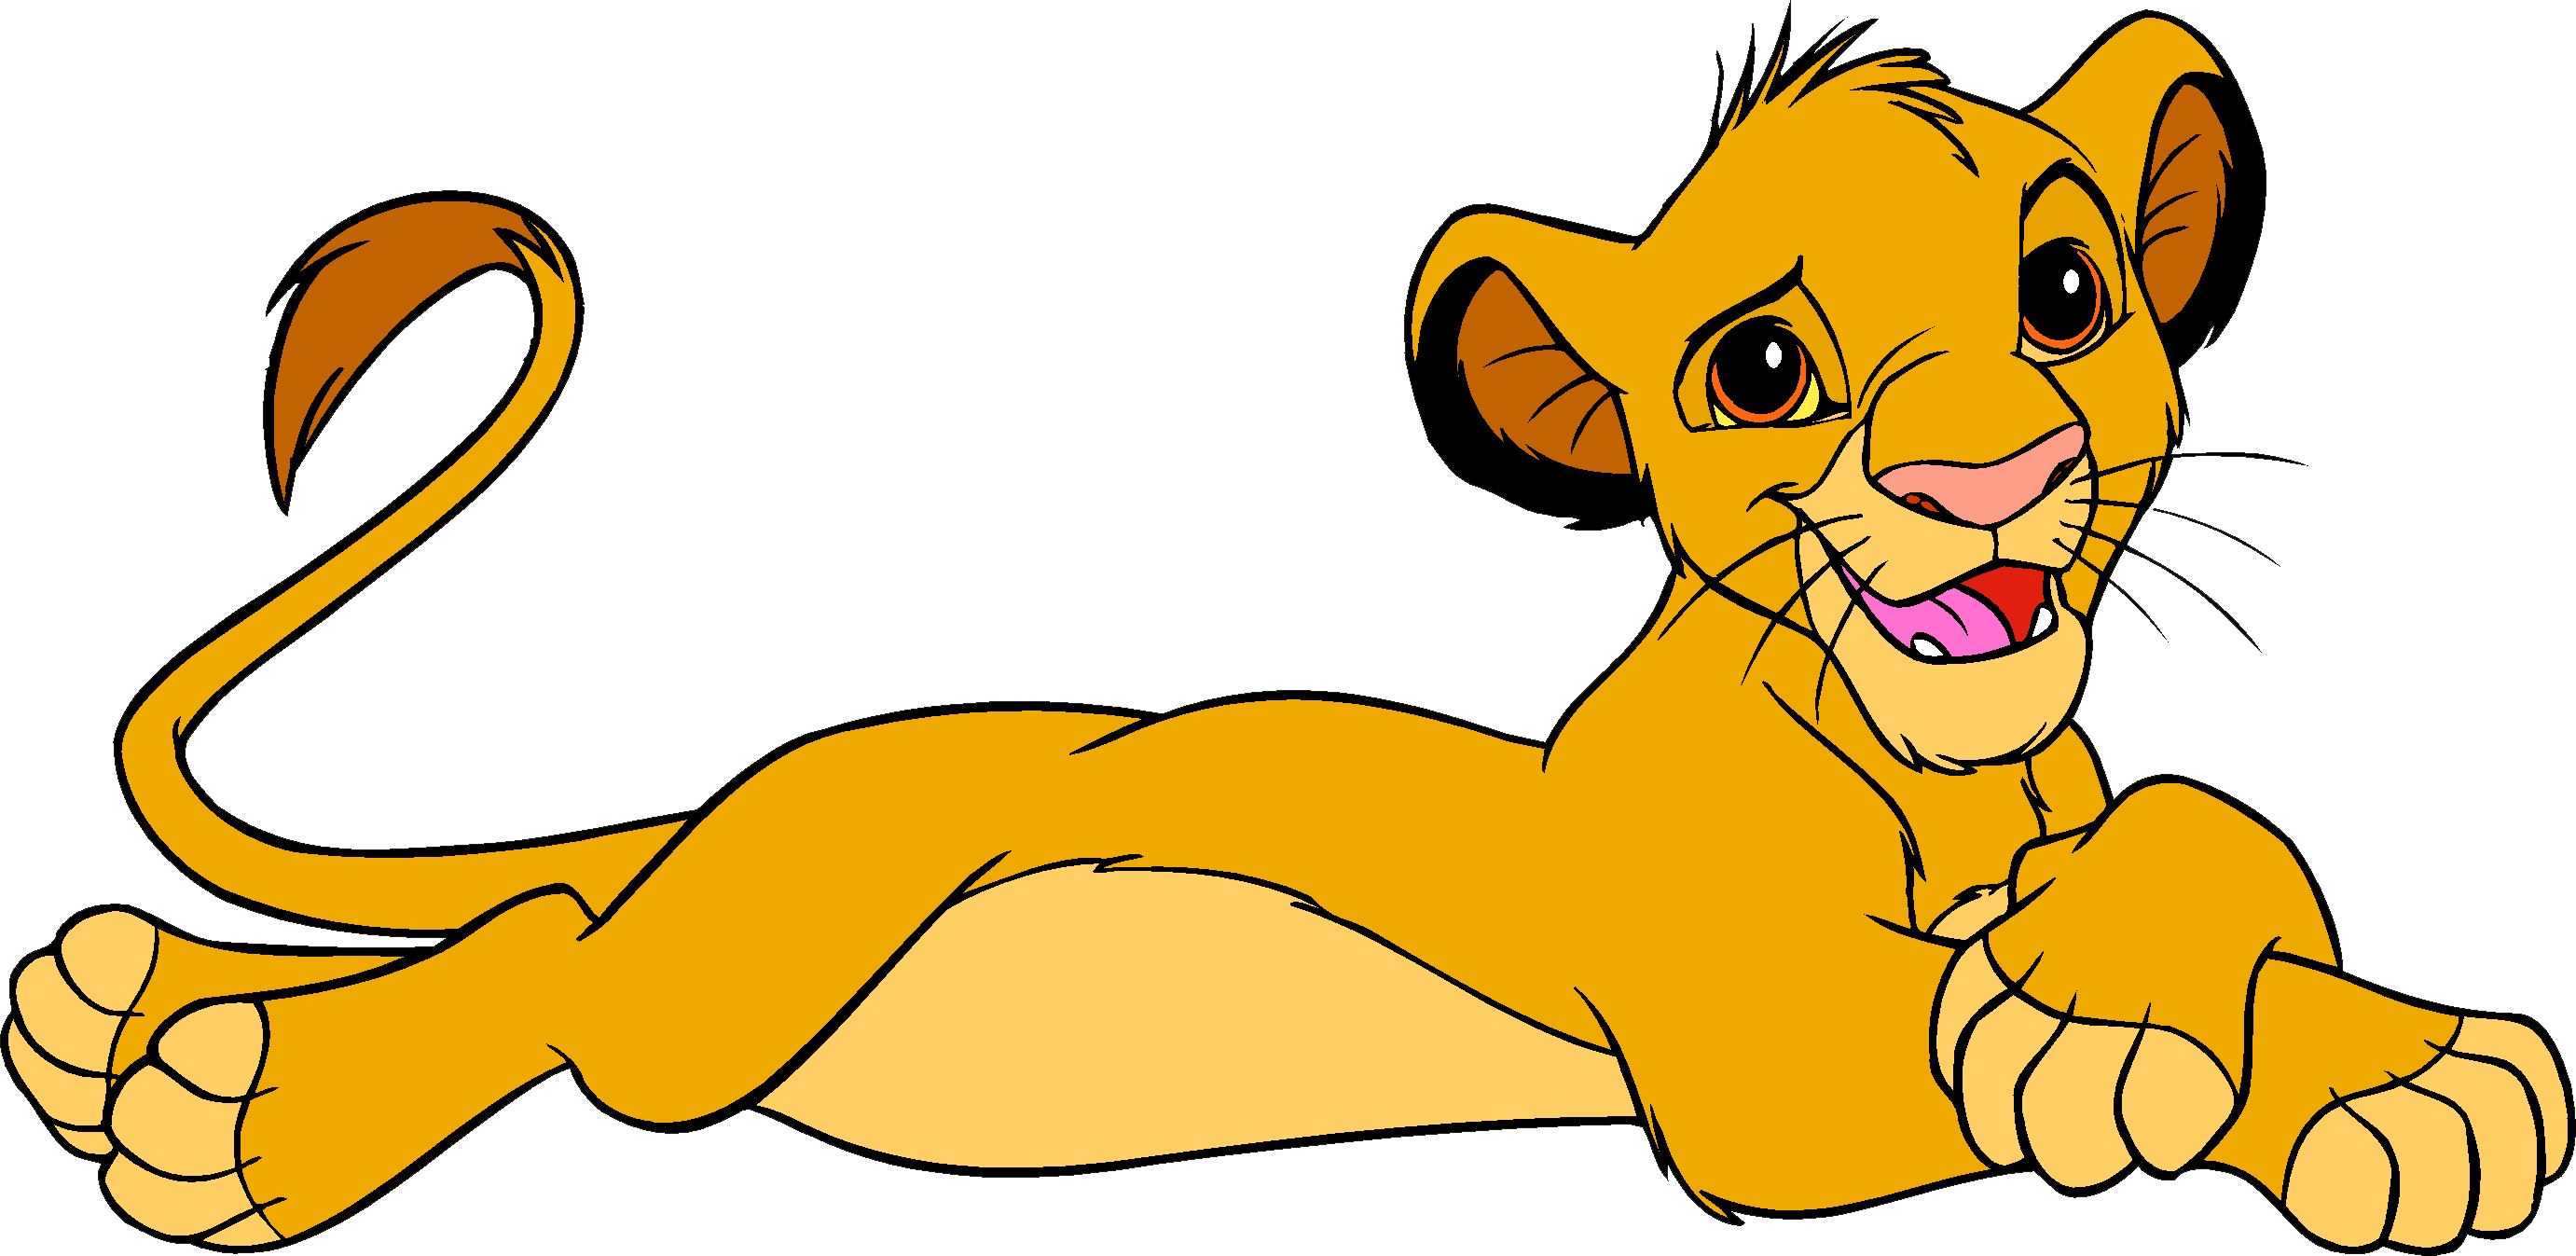 Lion king png images. Young clipart simba cub